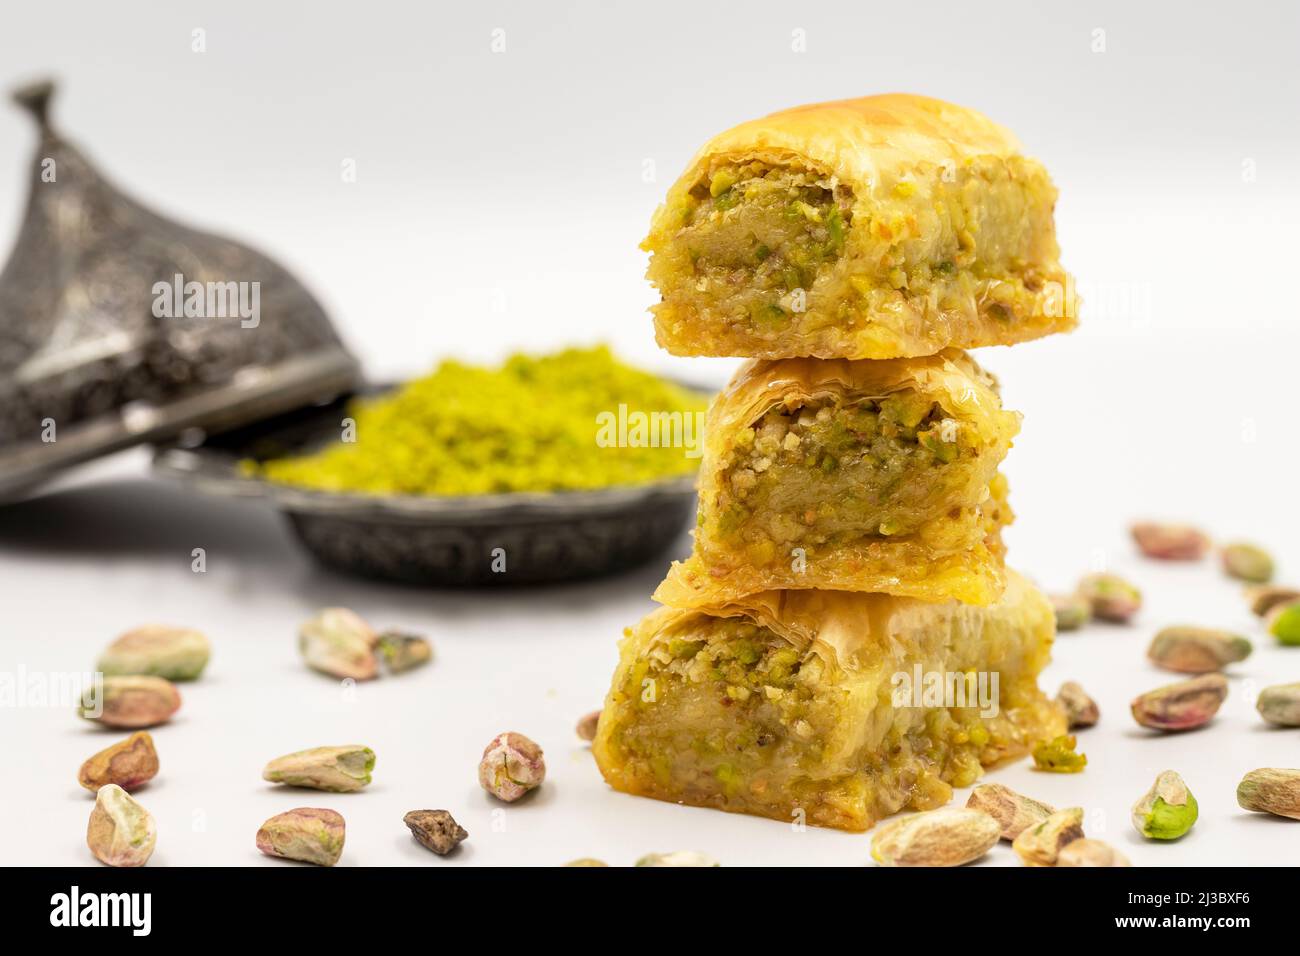 Baklava with pistachio on a white background. Traditional Mediterranean cuisine delicacies. close-up baklava Stock Photo